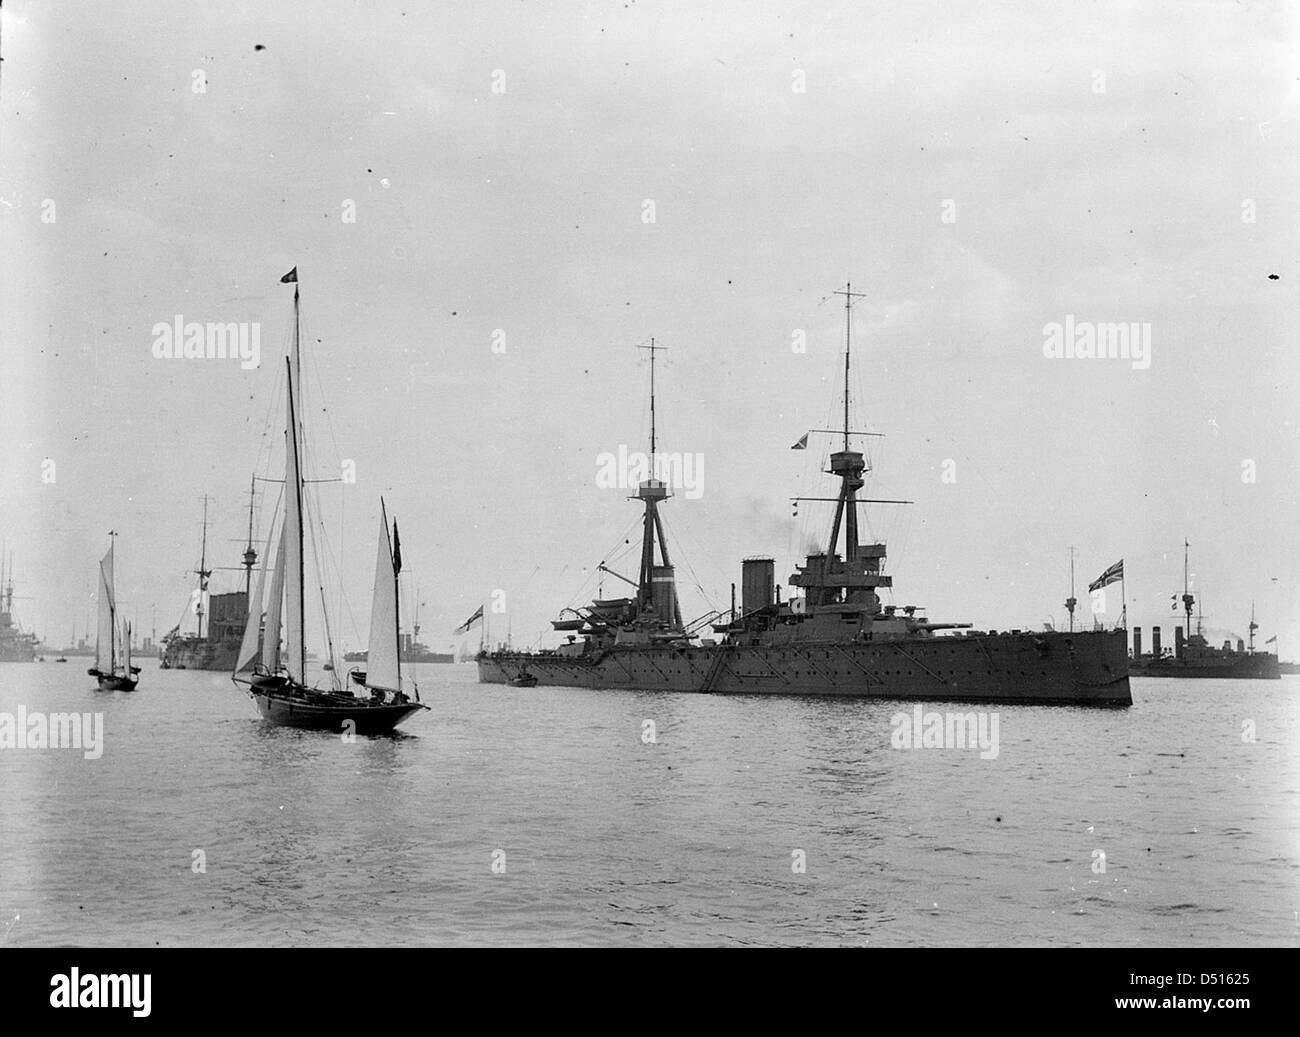 A general view of the line of ships during the Naval Review at Spithead Stock Photo